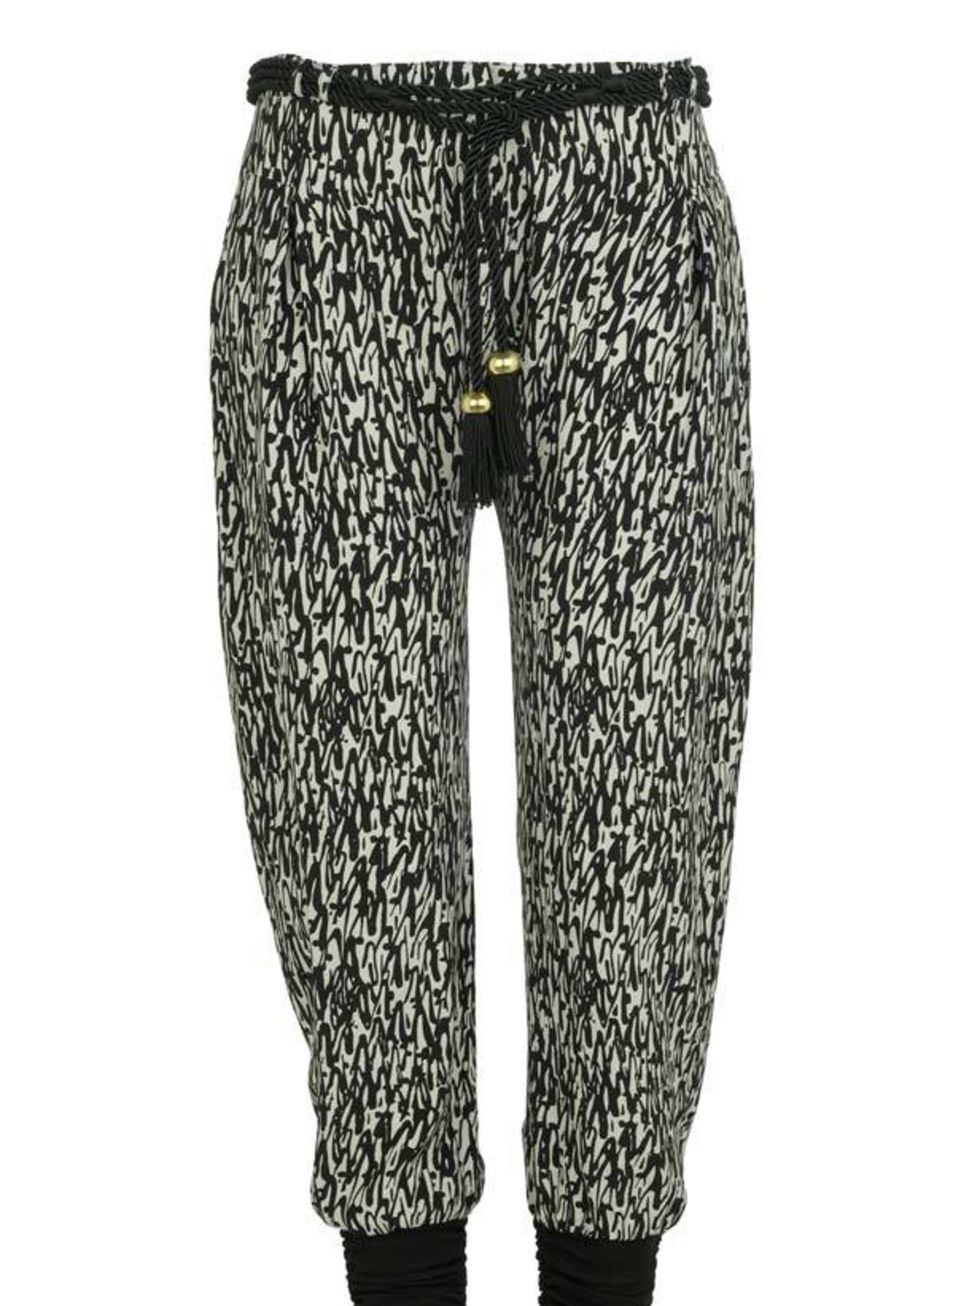 <p>Tribal print trousers, £24.99, by <a href="http://xml.riverisland.com/flash/content.php">River Island </a></p>